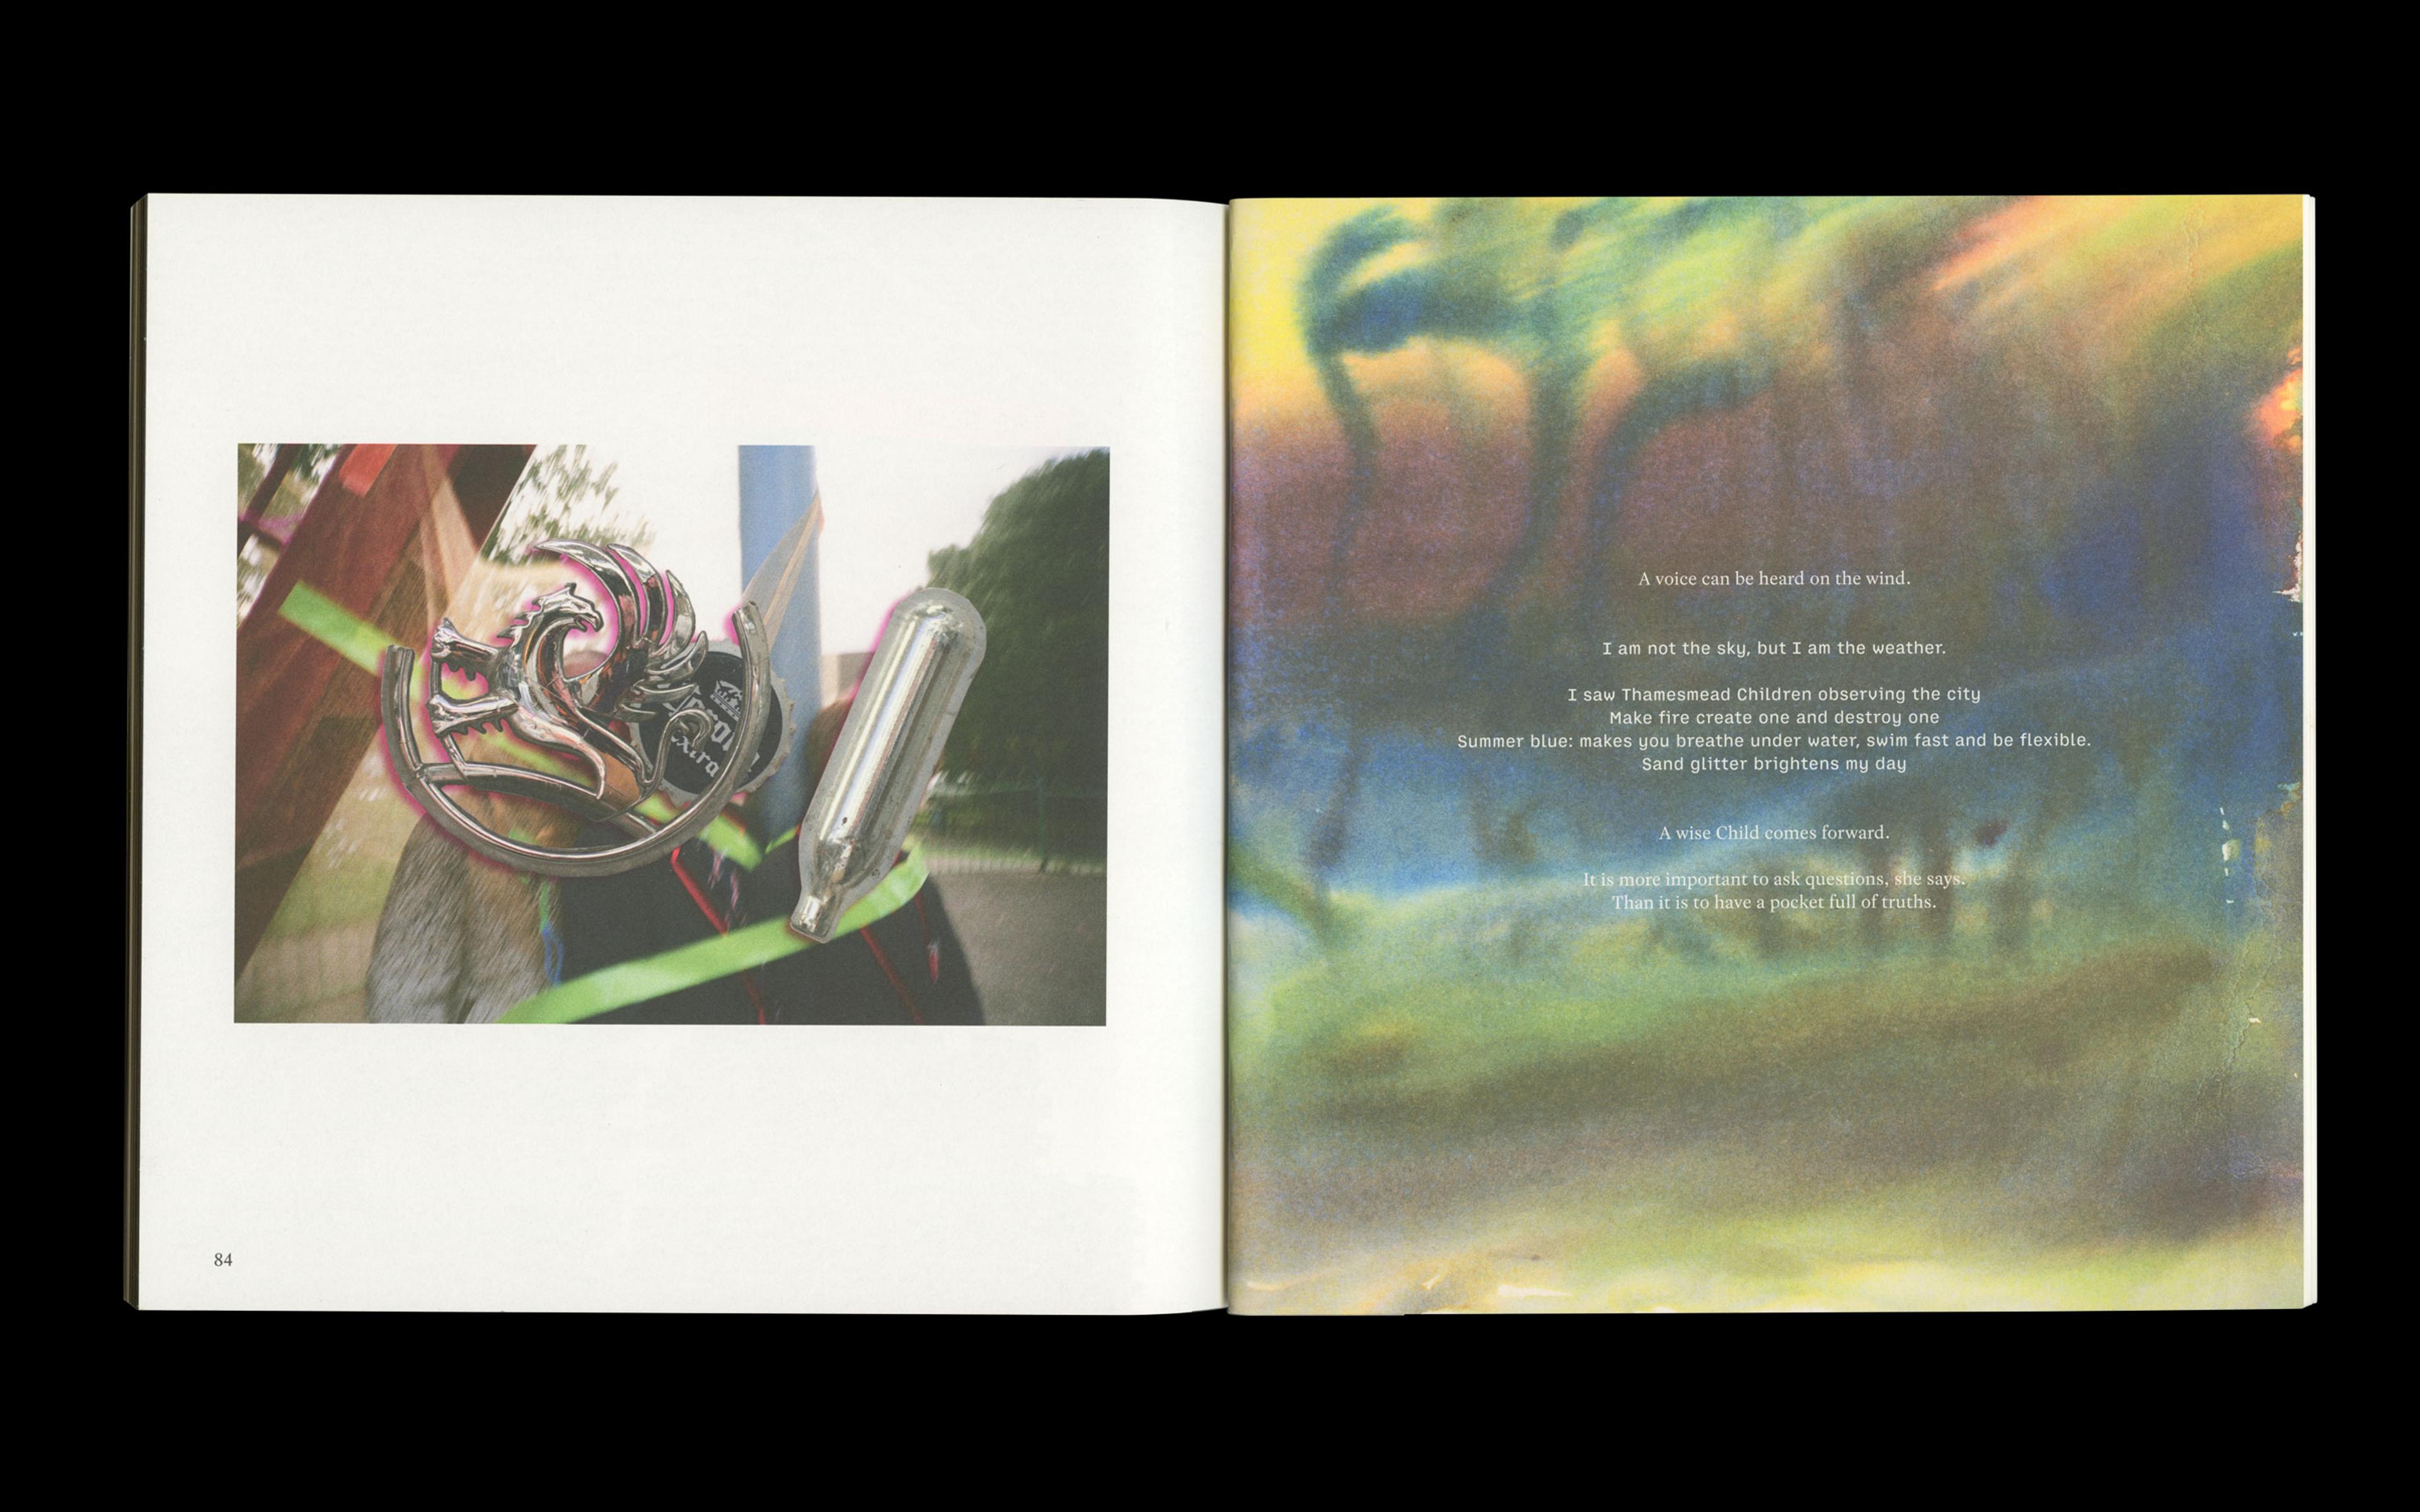 Scan of internal spread from The Brightness of Juju by Dunya Kalantery and Rima Patel showing children's photo collage and text overlaid on children's ink work